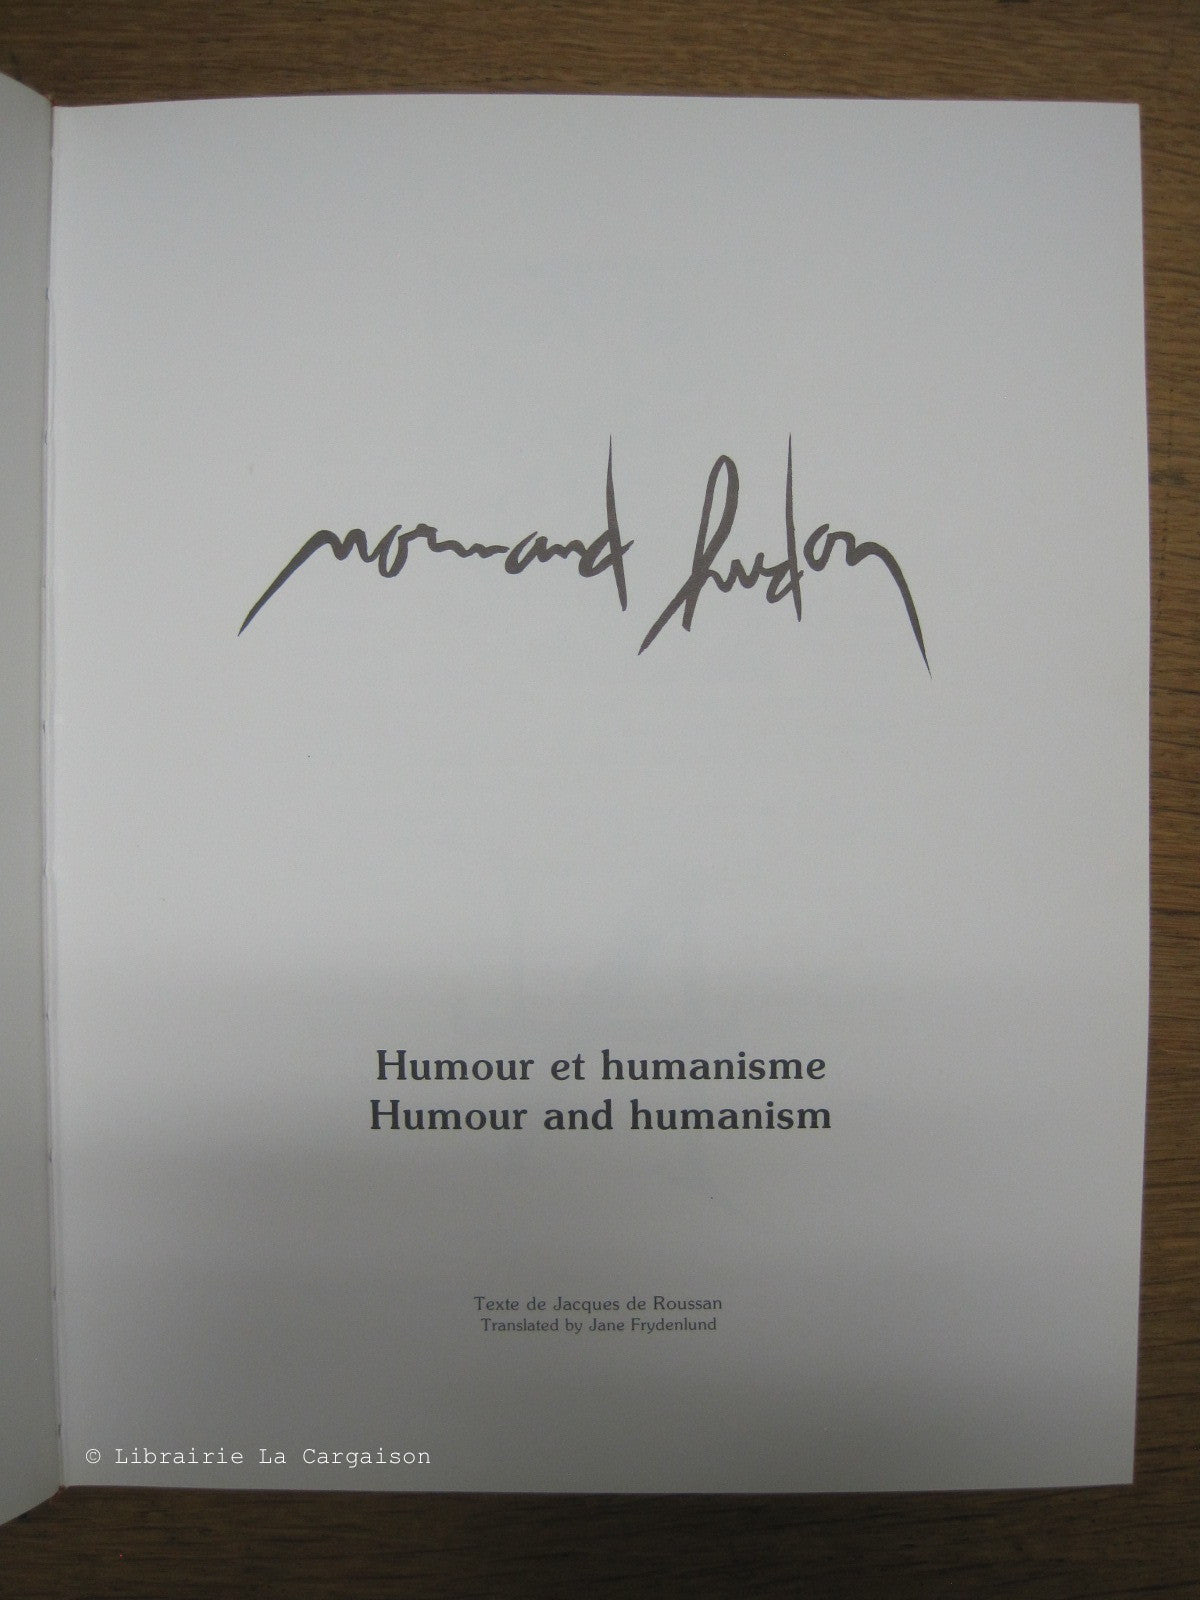 HUDON, NORMAND. Normand Hudon : Humour et humanisme - Humour and humanism